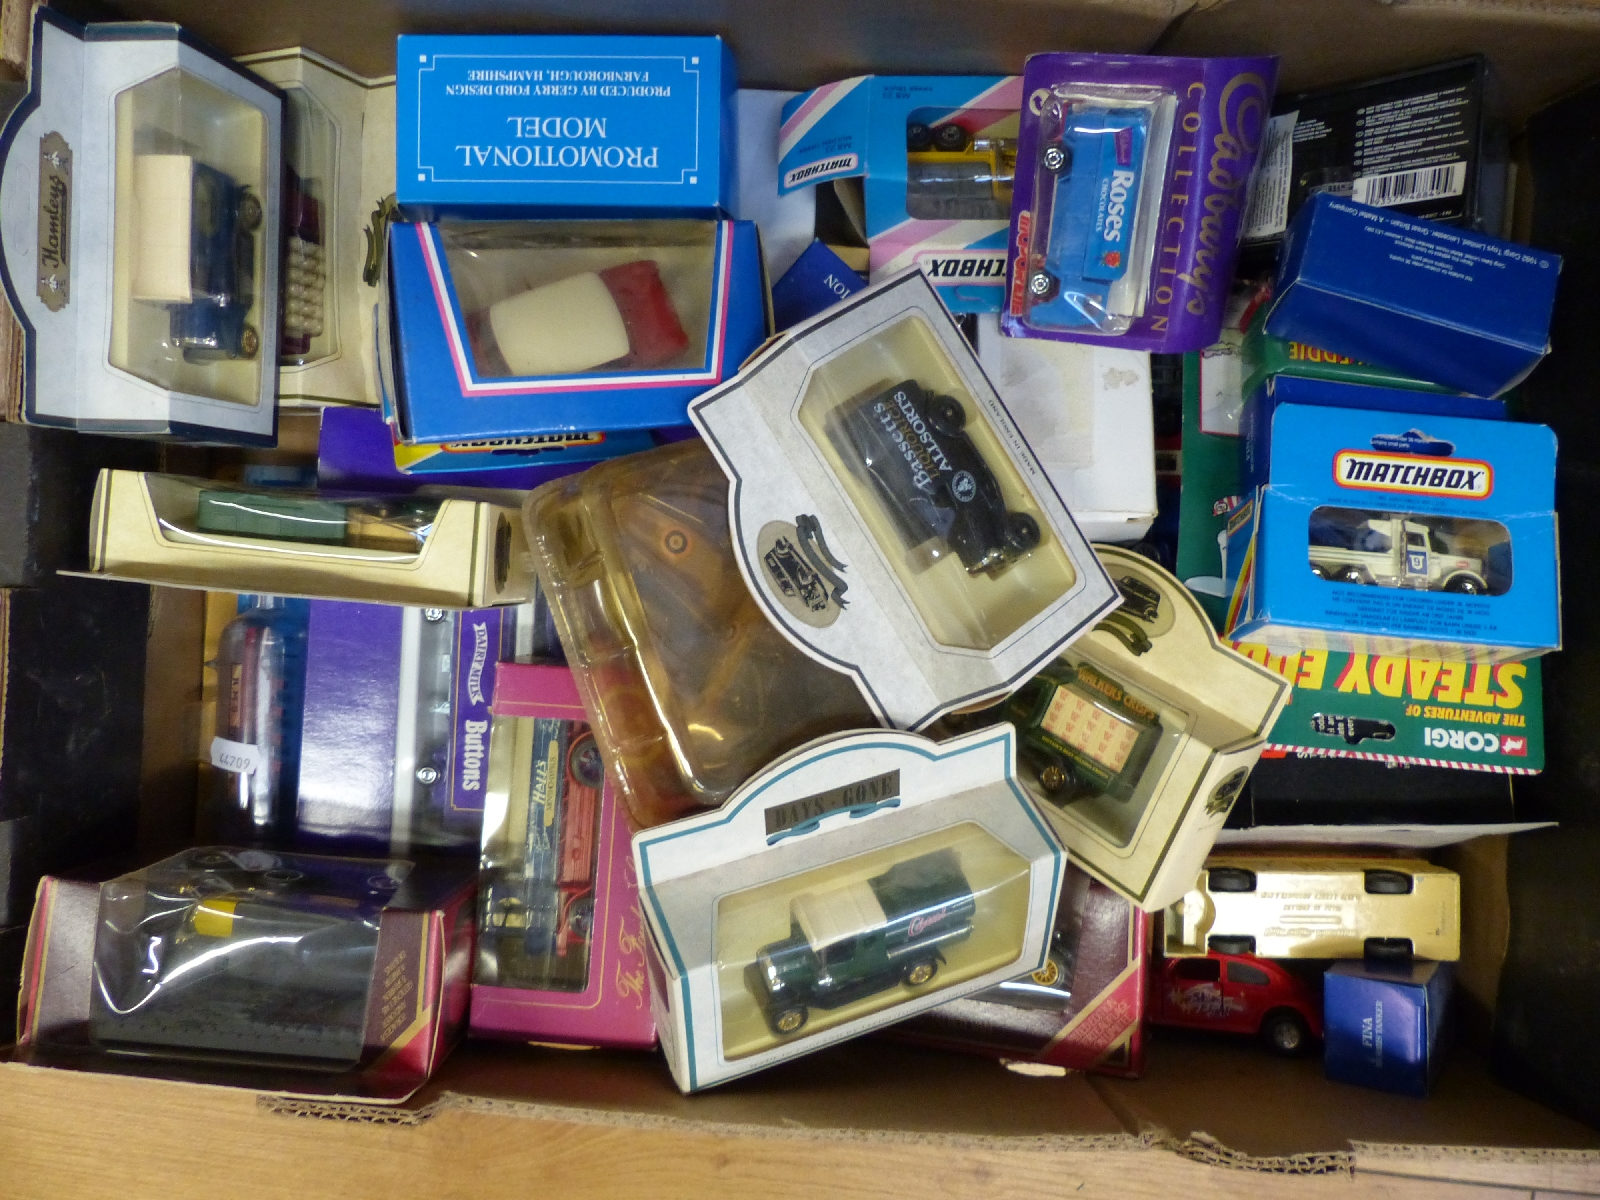 Over forty Corgi, Matchbox, Majorette and similar diecast model vehicles, some in original boxes.